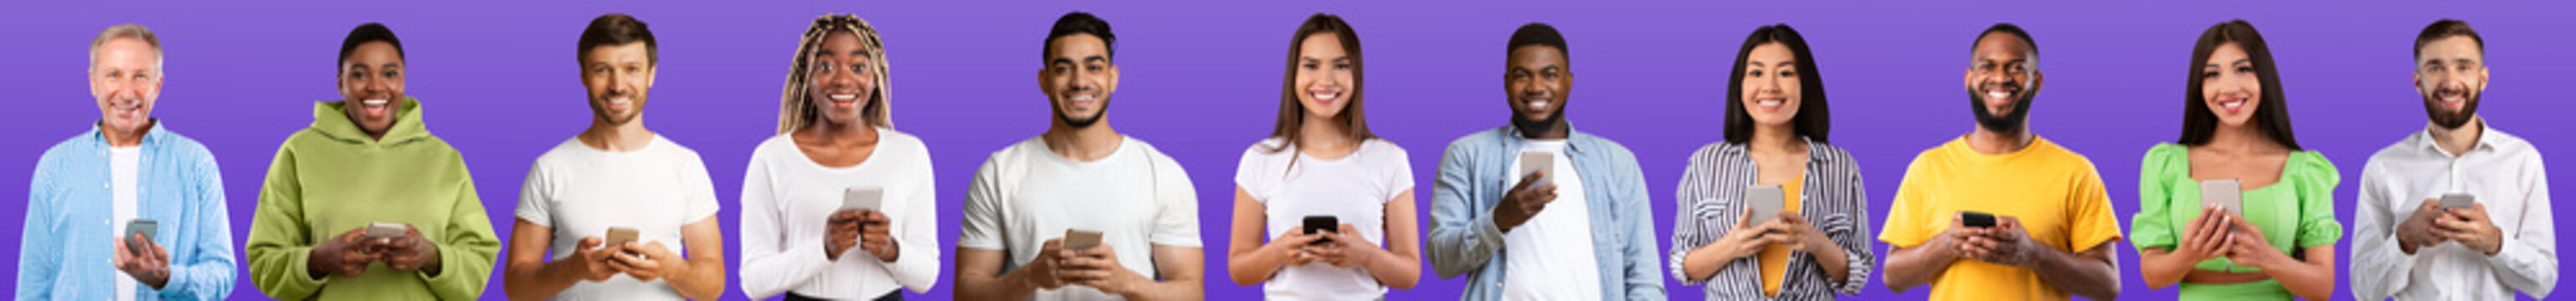 Smiling old and young diverse men and ladies chatting at smartphones isolated on purple background, studio